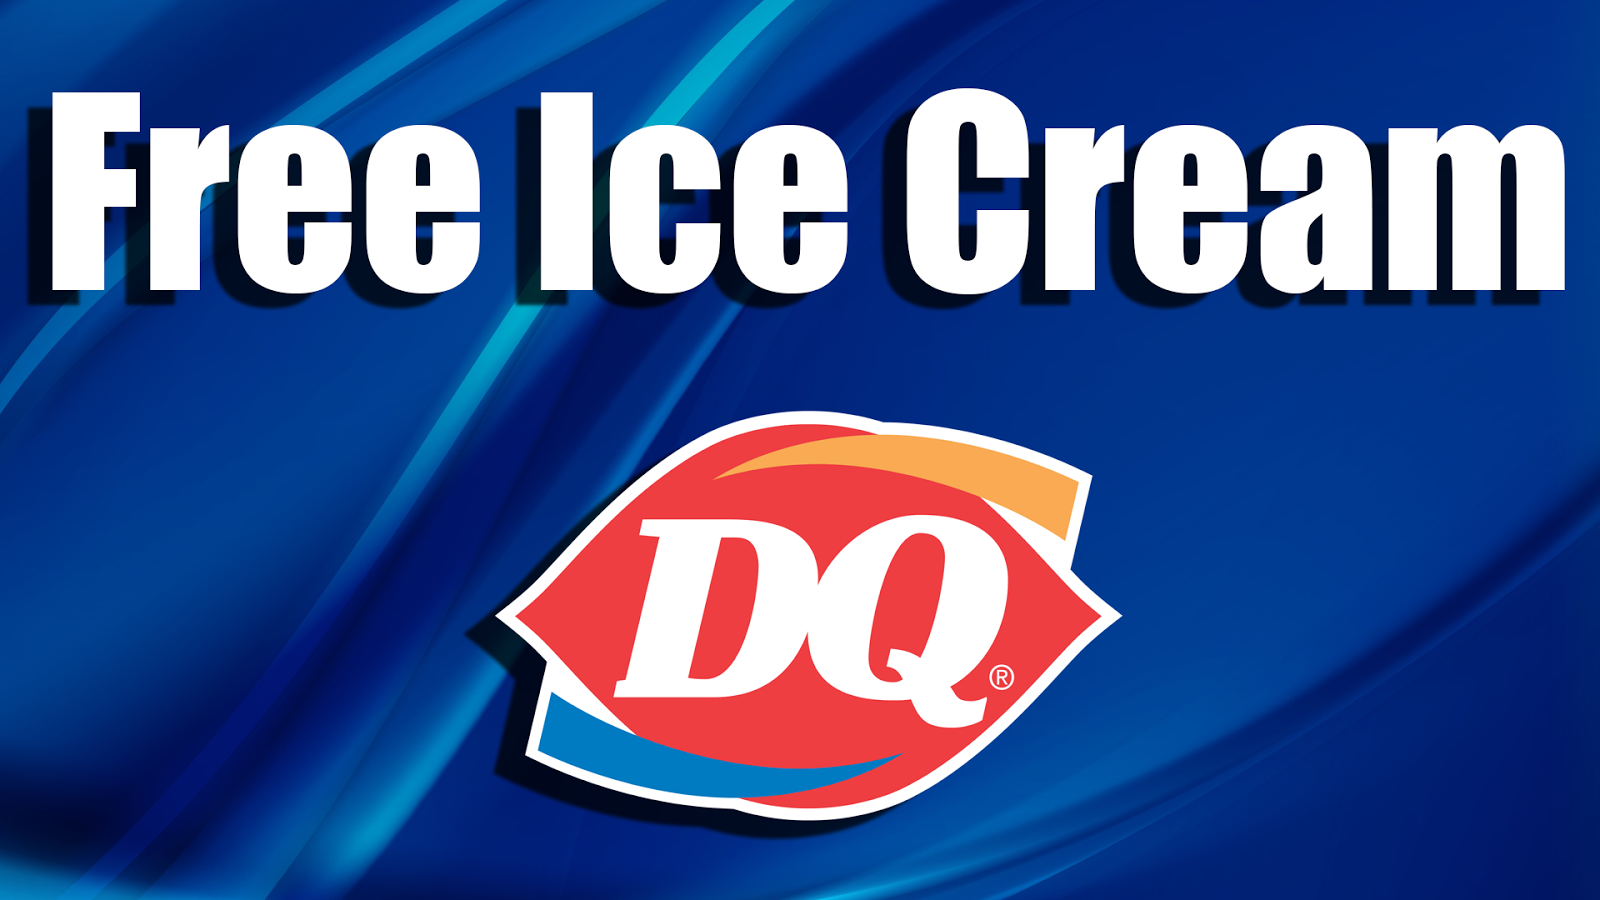 Free Ice Cream from Dairy Queen on Monday